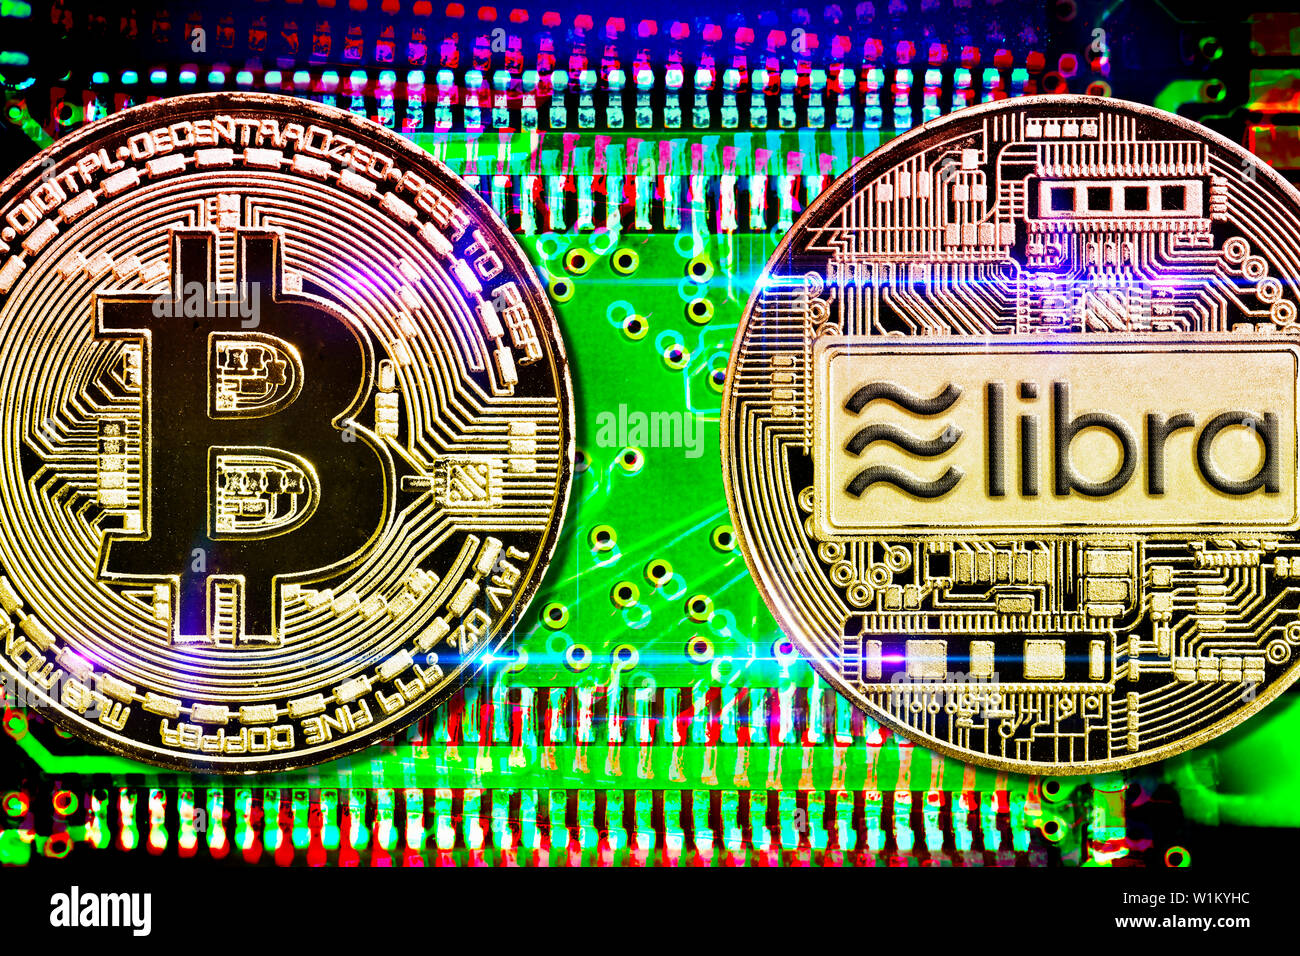 Bitcoin and libra cryptocurrency coins on computer circuit board Stock Photo